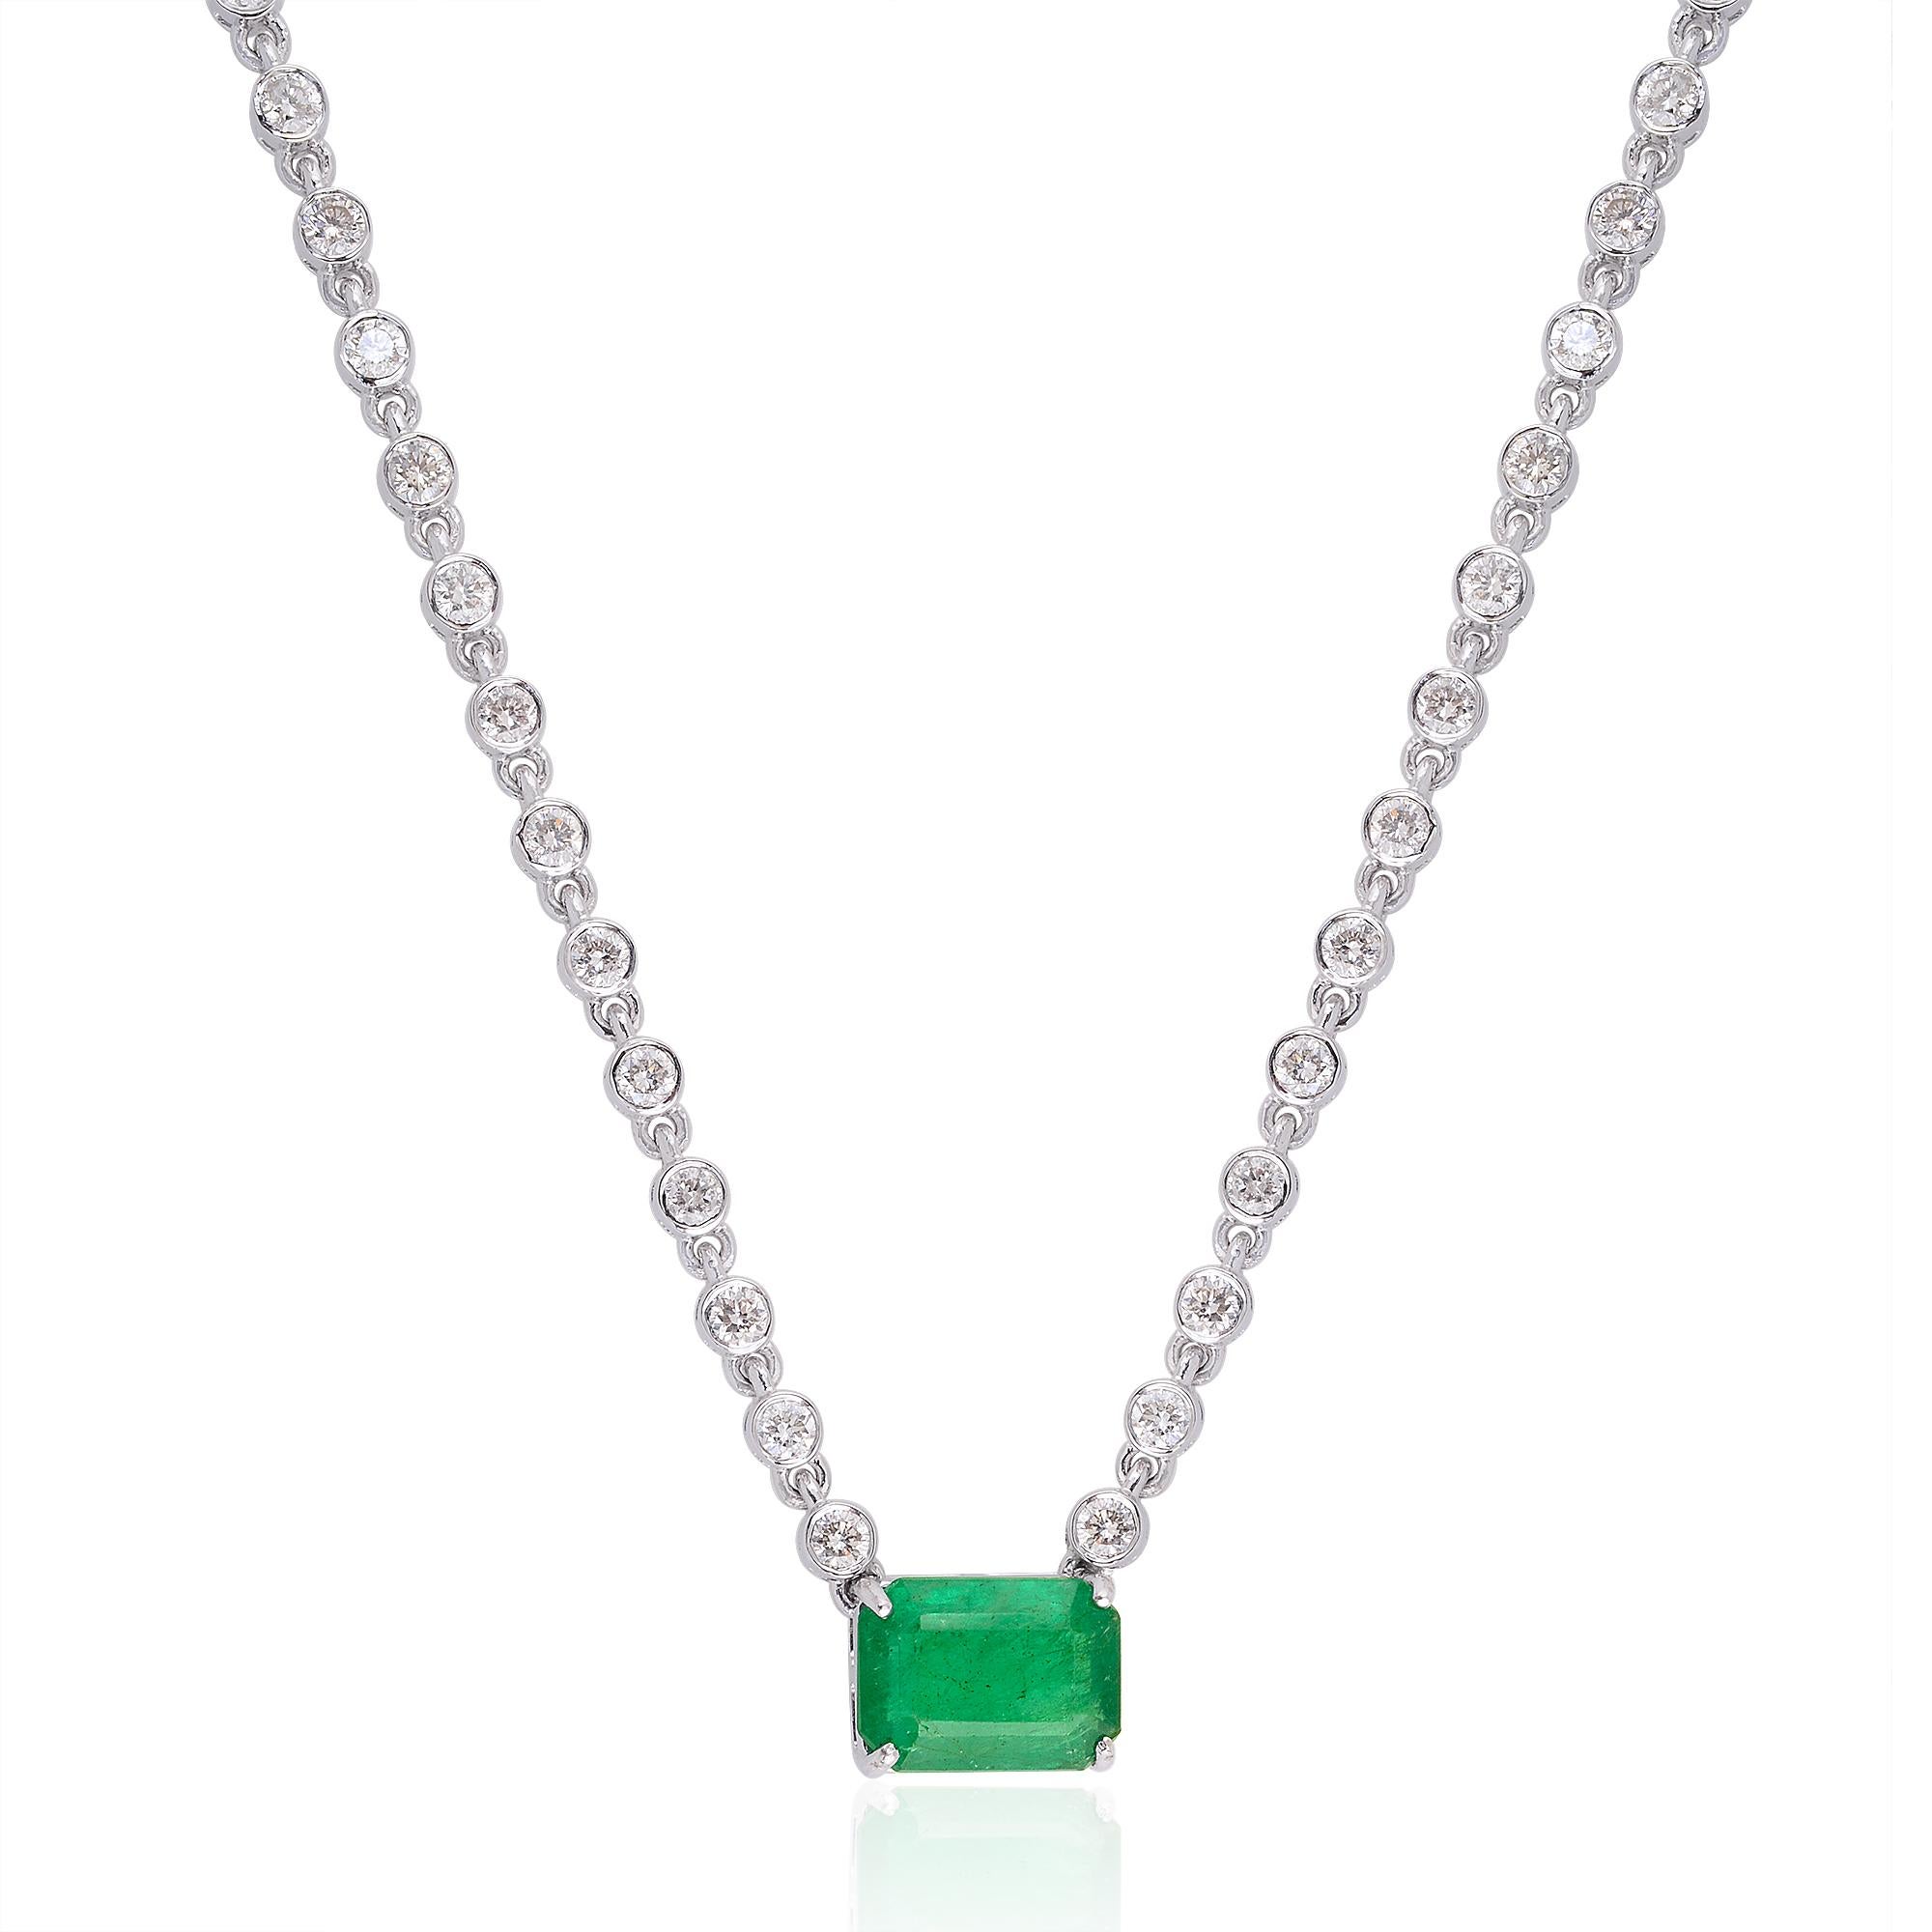 The emerald is surrounded by a halo of brilliant-cut diamonds, meticulously set in 18k white gold. These exquisite diamonds not only enhance the emerald's natural radiance but also add a touch of glamour and sparkle to the necklace.

Item Code :-